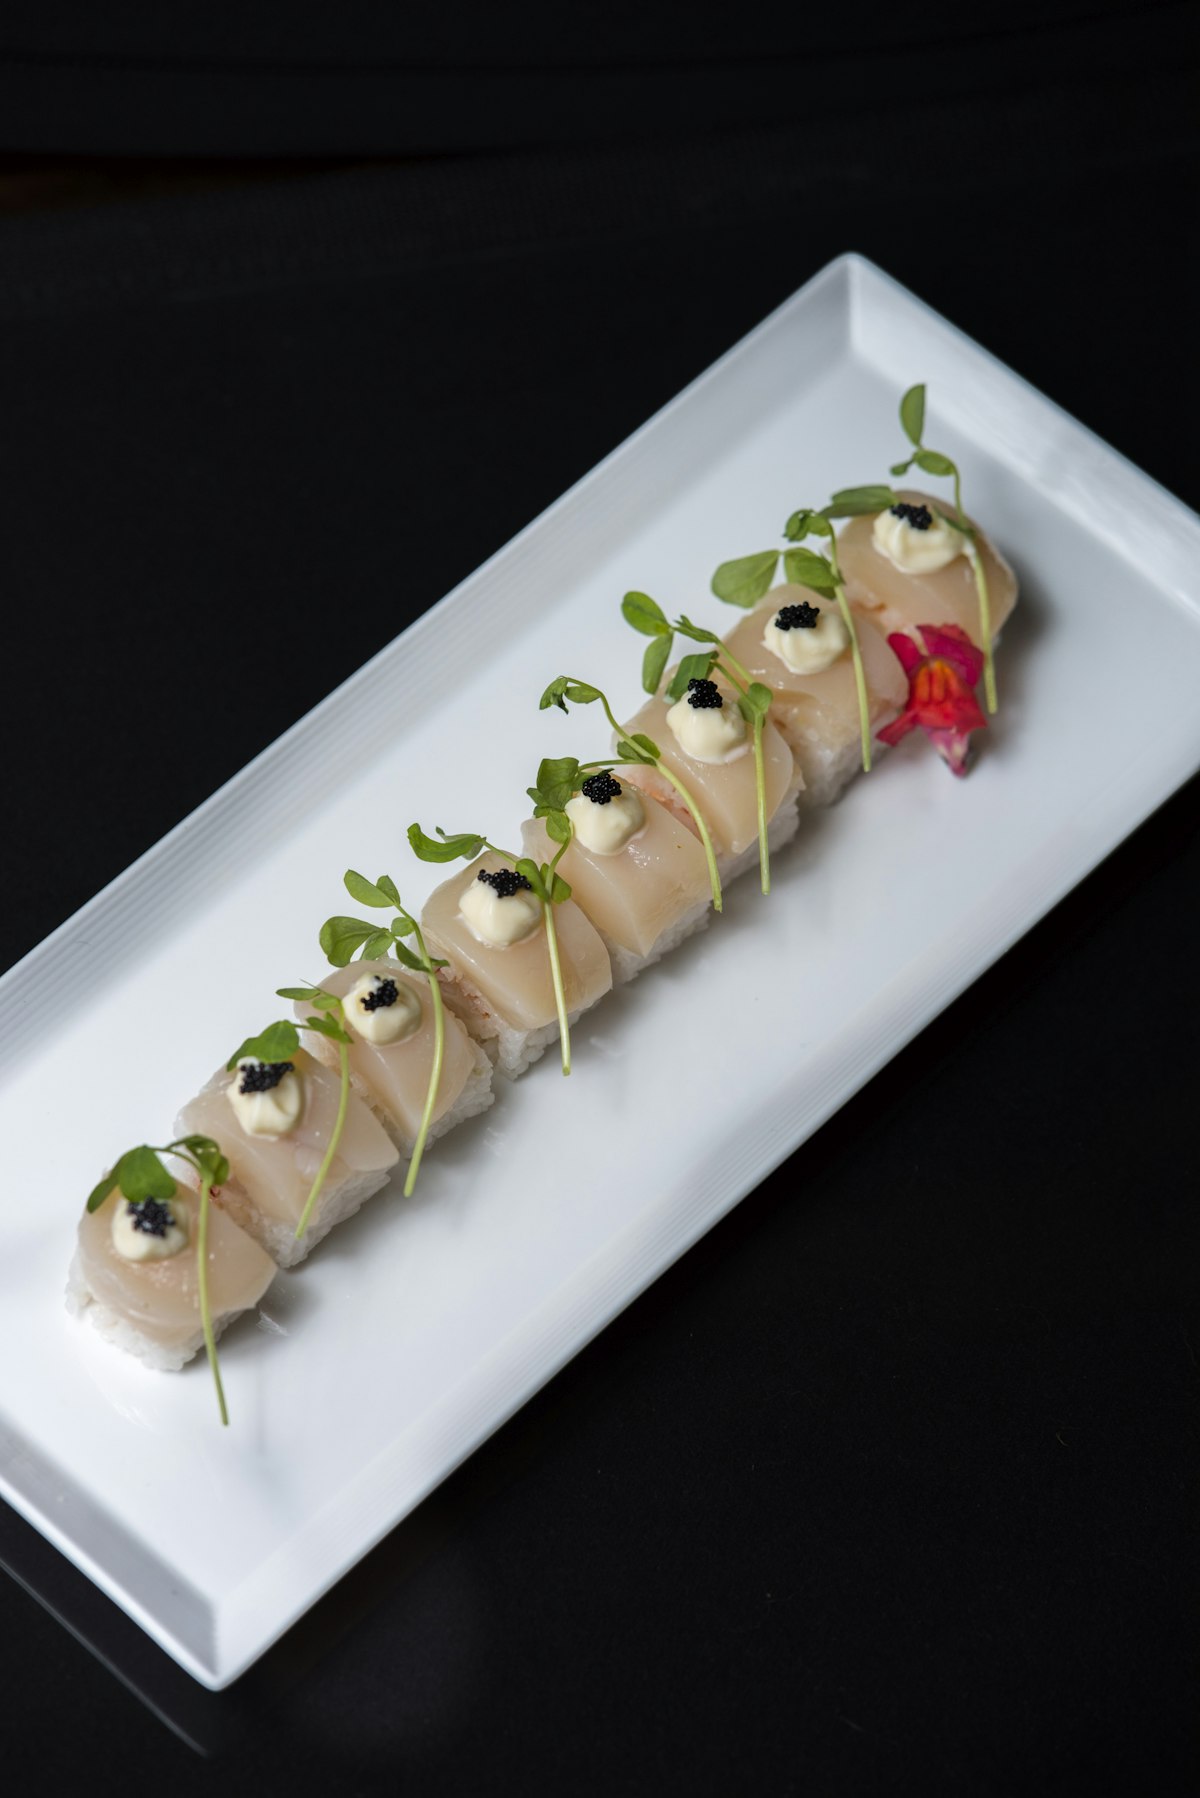 Scallop roll with black tobiko caviar, mayonnaise and sprouts.